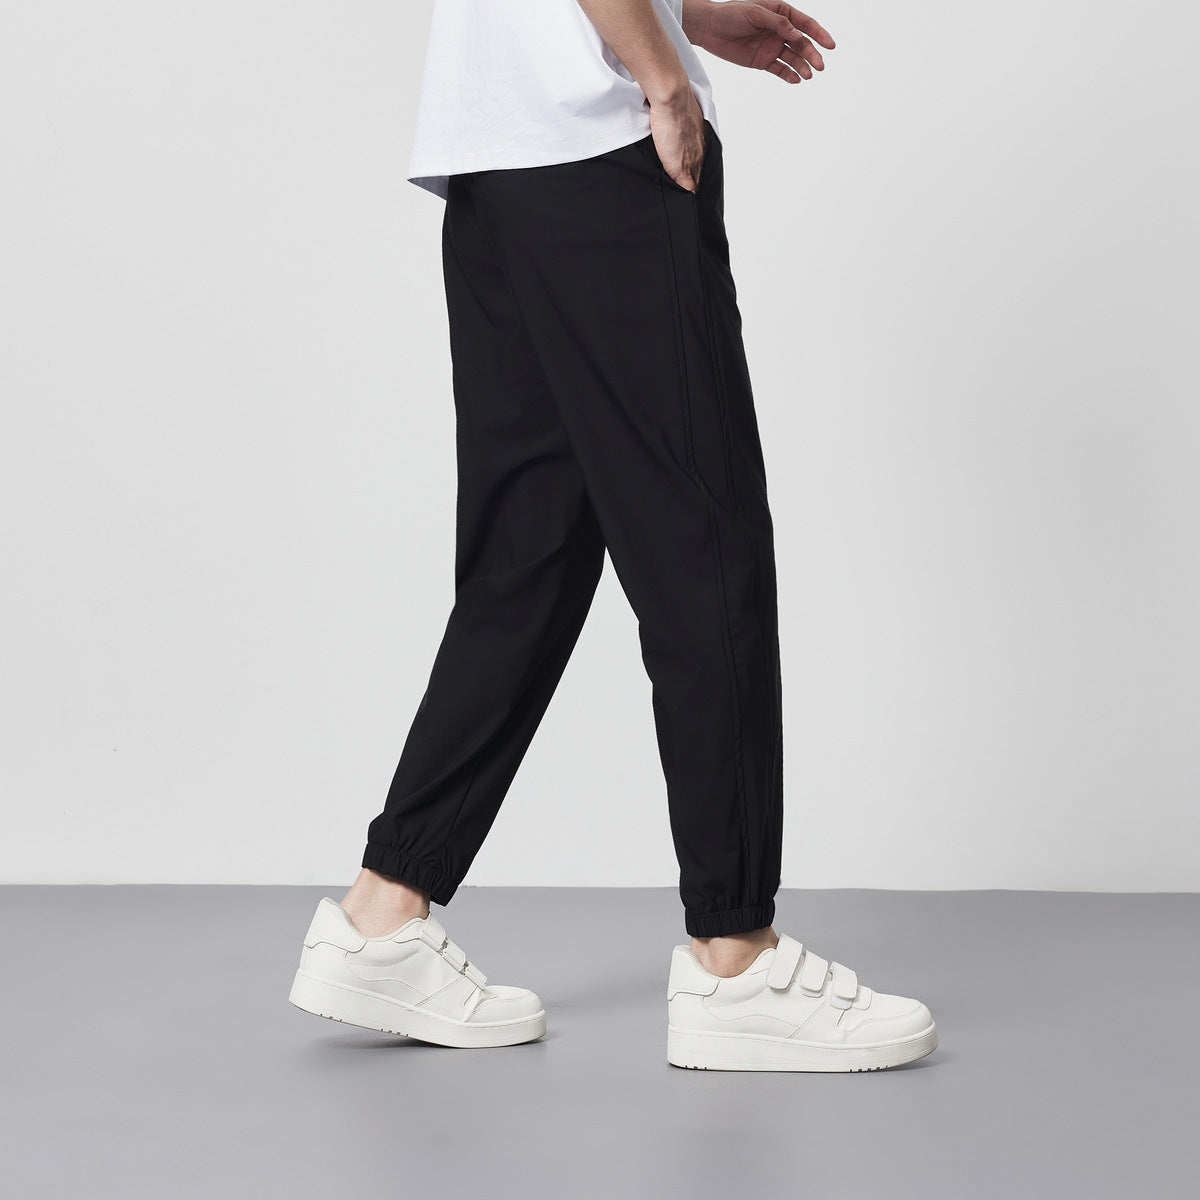 Ice Silk Cool Thin Casual Pants Ankle-length Pants For Men